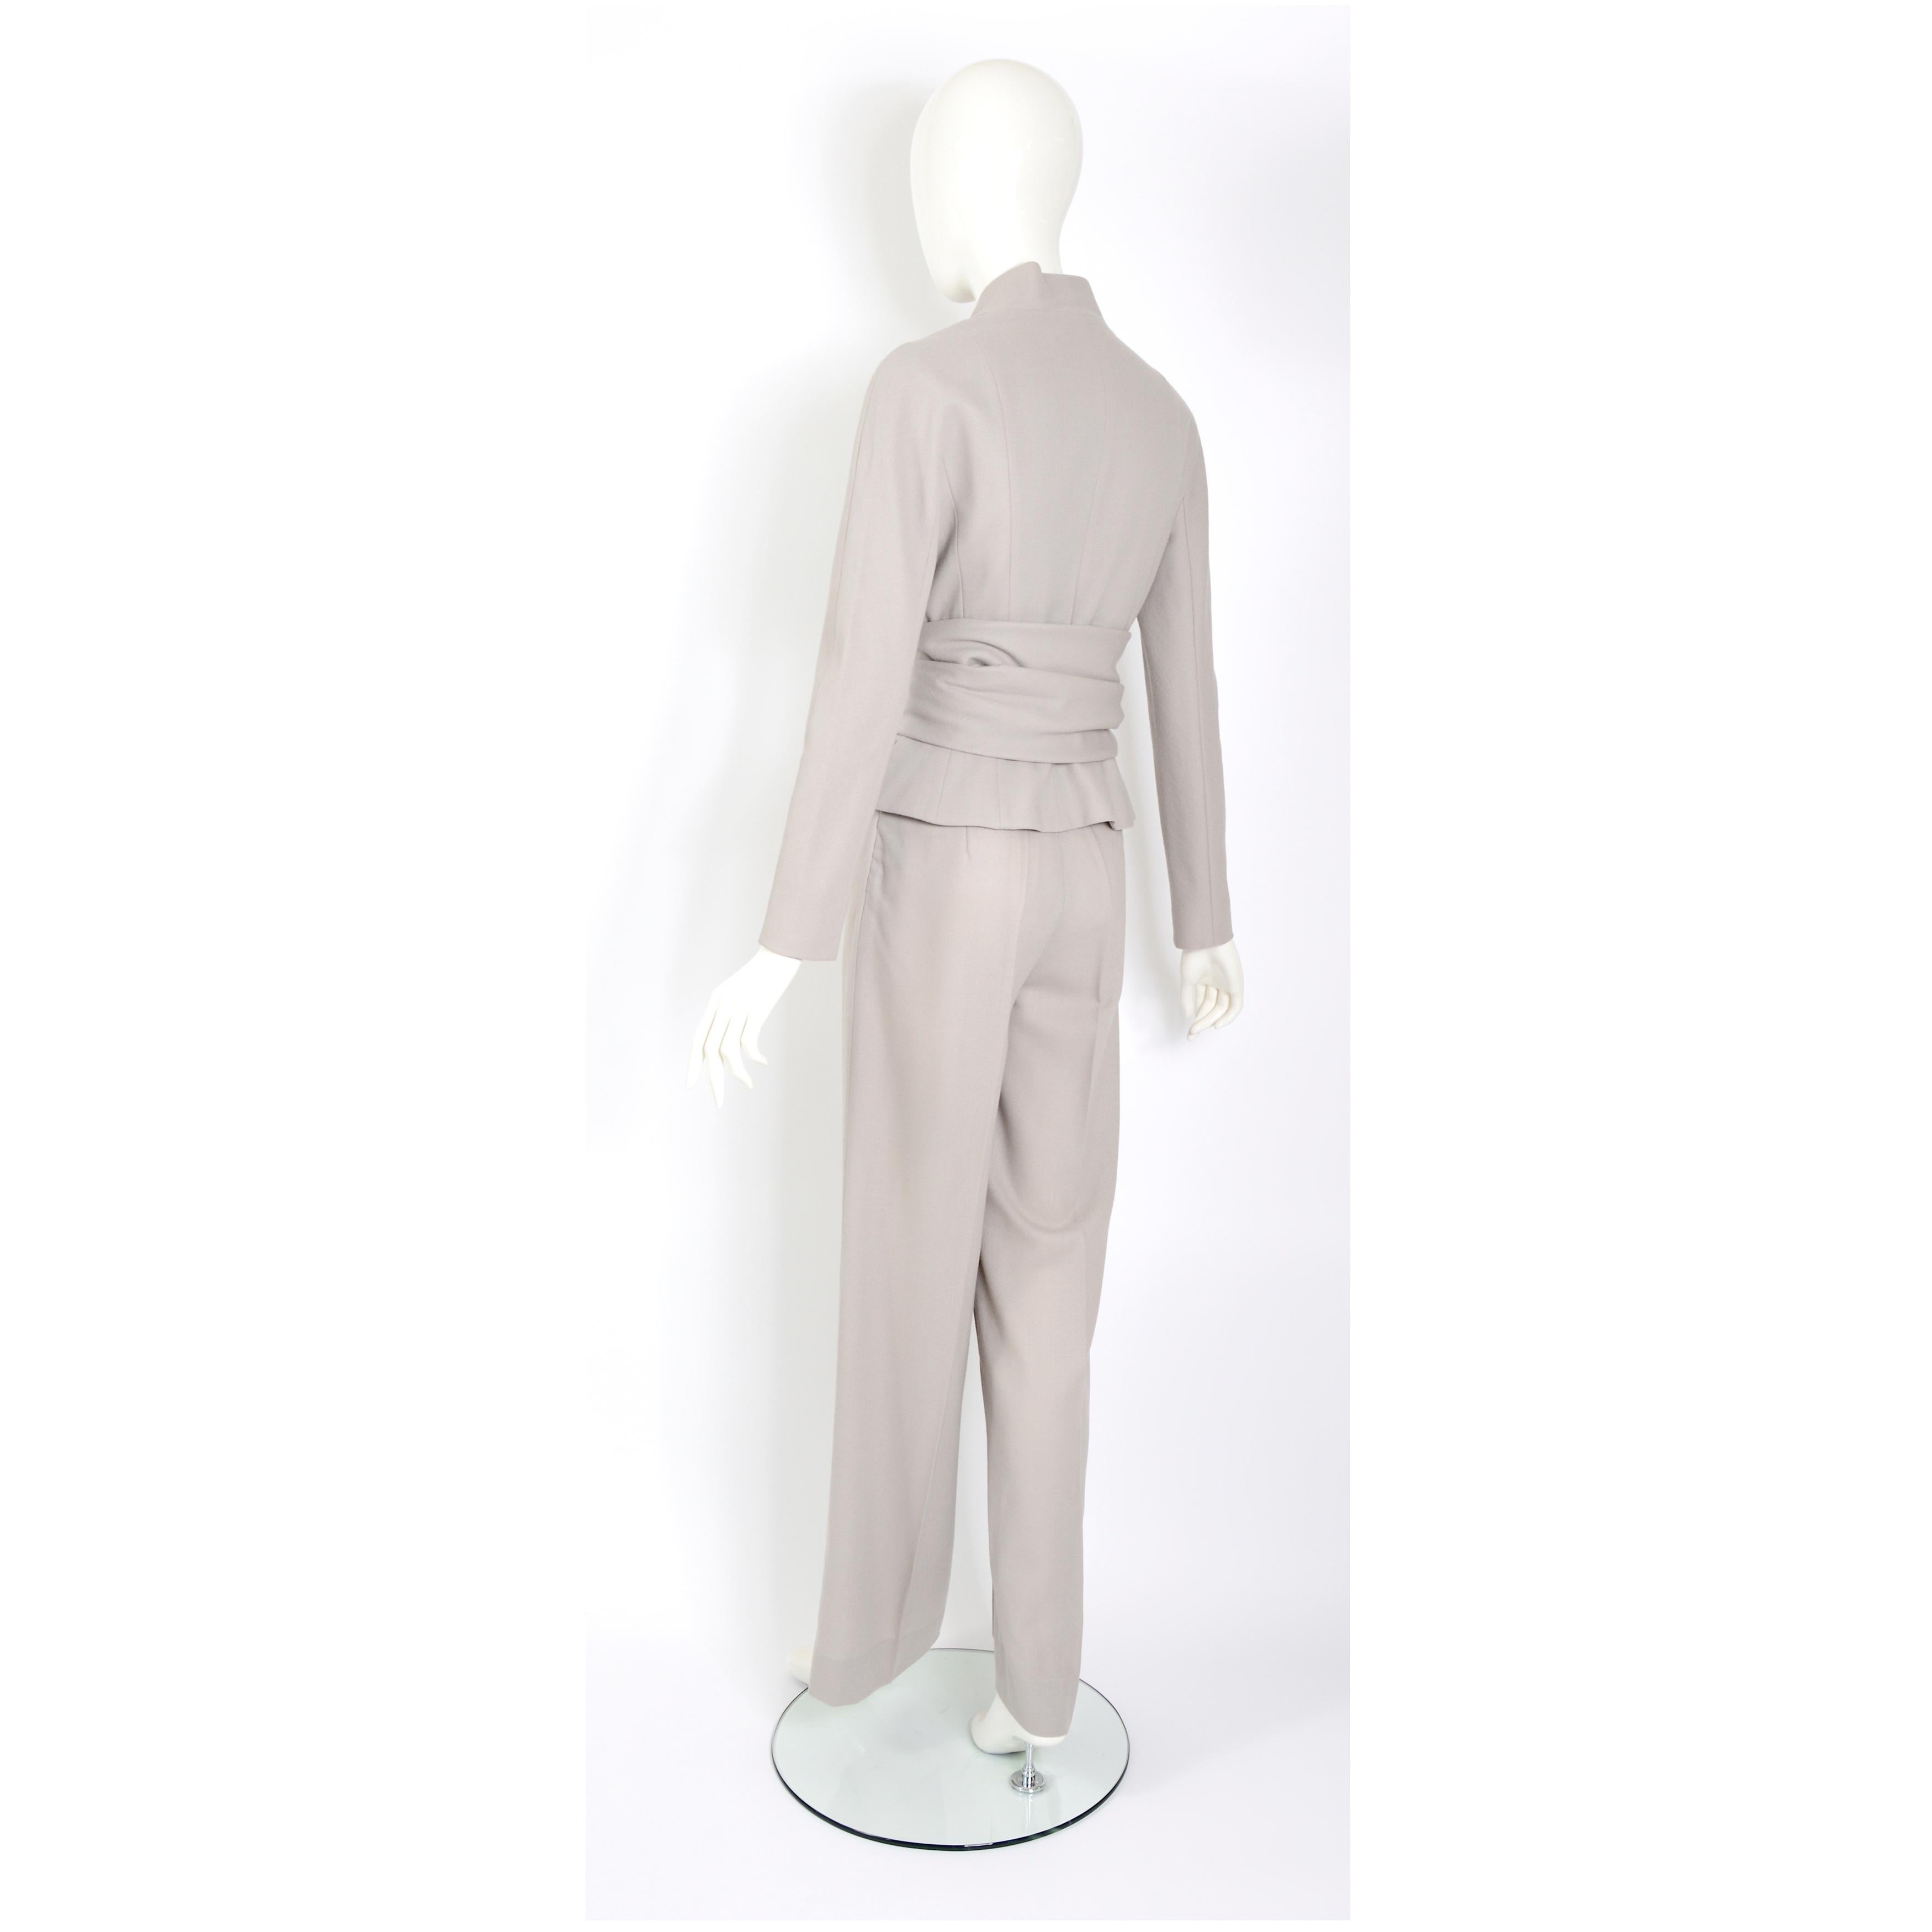 Women's Christian Dior by John Galliano vintage 2008 ready to wear suit For Sale